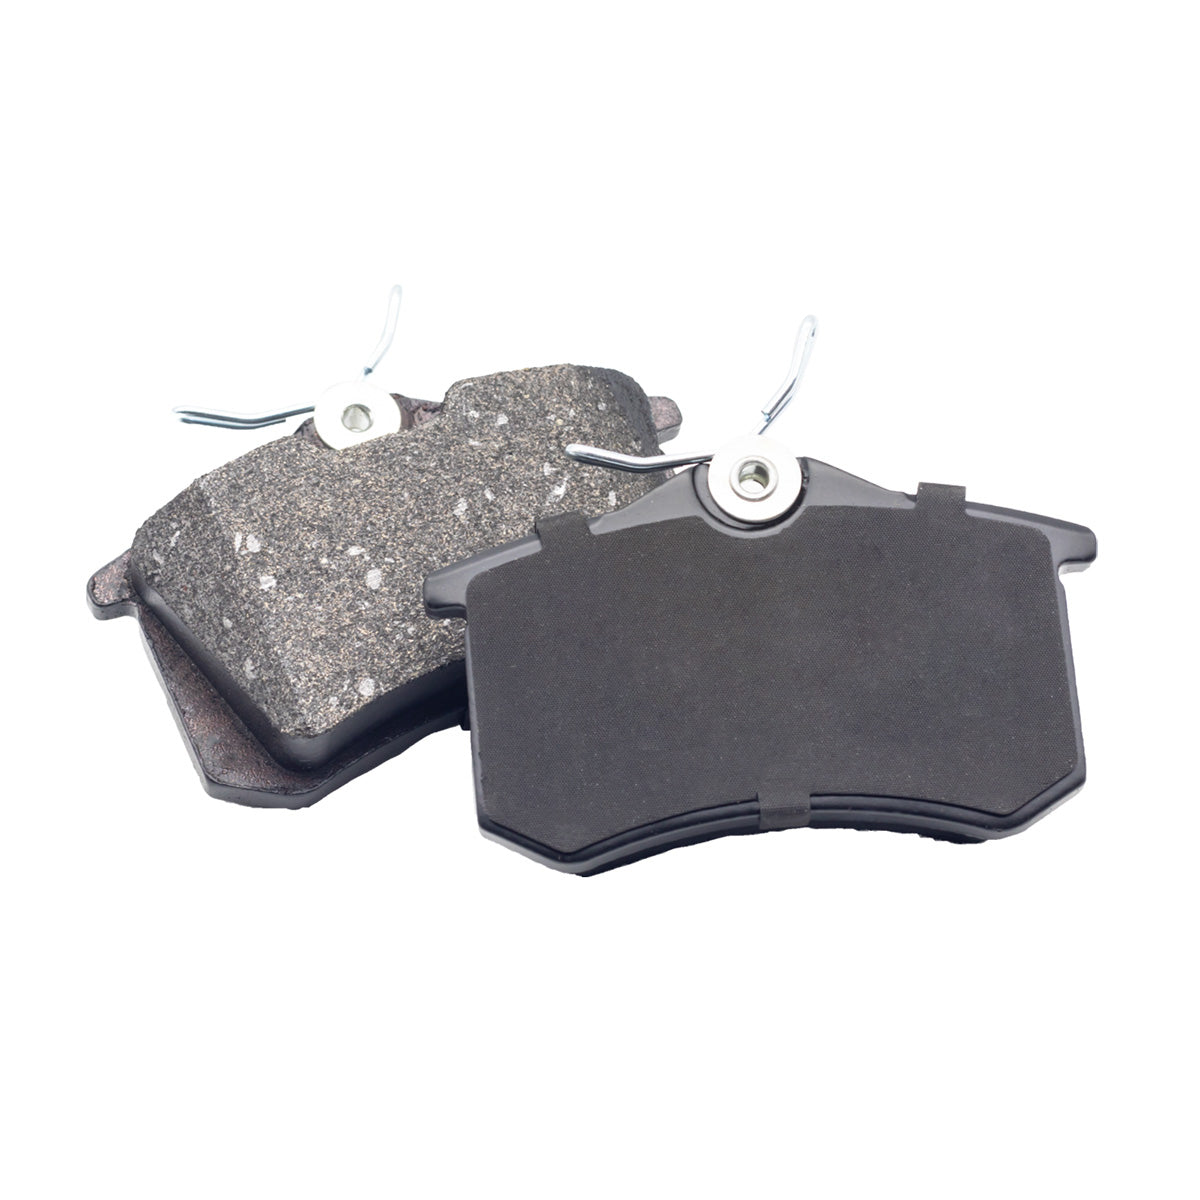 Why Choose LOOSOO High-end Vehicle Brake Pads? Loosoo is dedicated to manufacture brake pads with specific premium materials, ensuring exceptional stopping power and quiet operation with low dust. We have advanced production, research, and testing equipments and have developed a series of car brake pads and rotors with various formulations to meet the different needs of various countries.